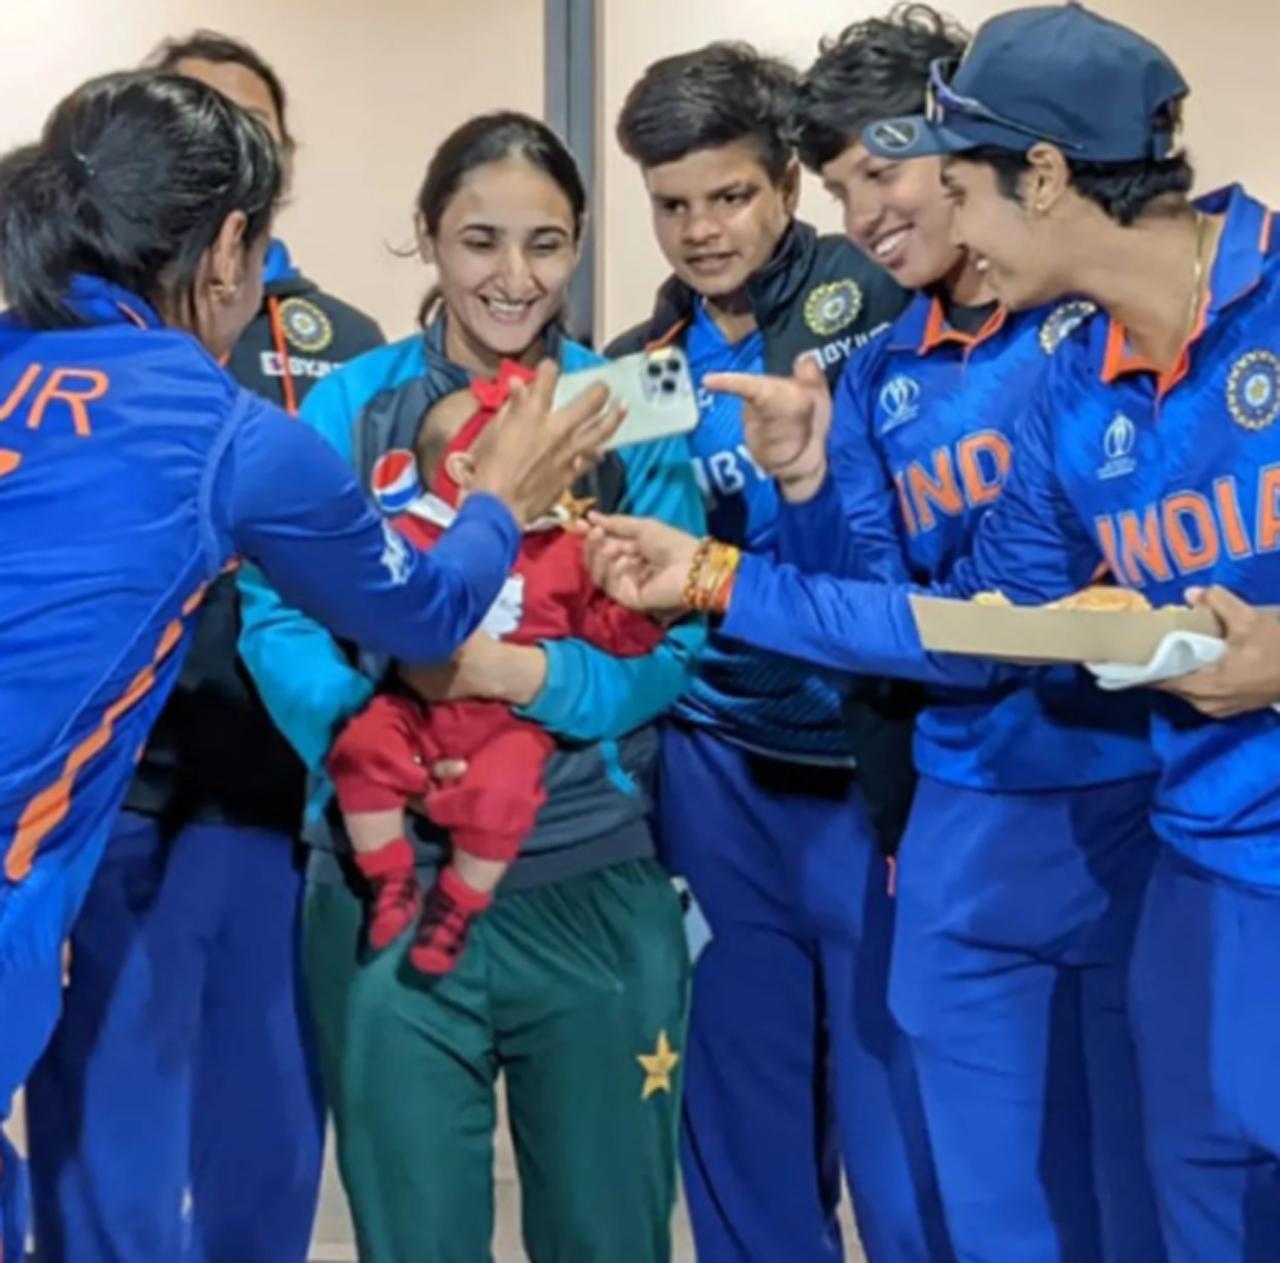 Women's Day special: India eves, Sindhu, Sania, Phogat sisters - Wonder  Women in Indian sports